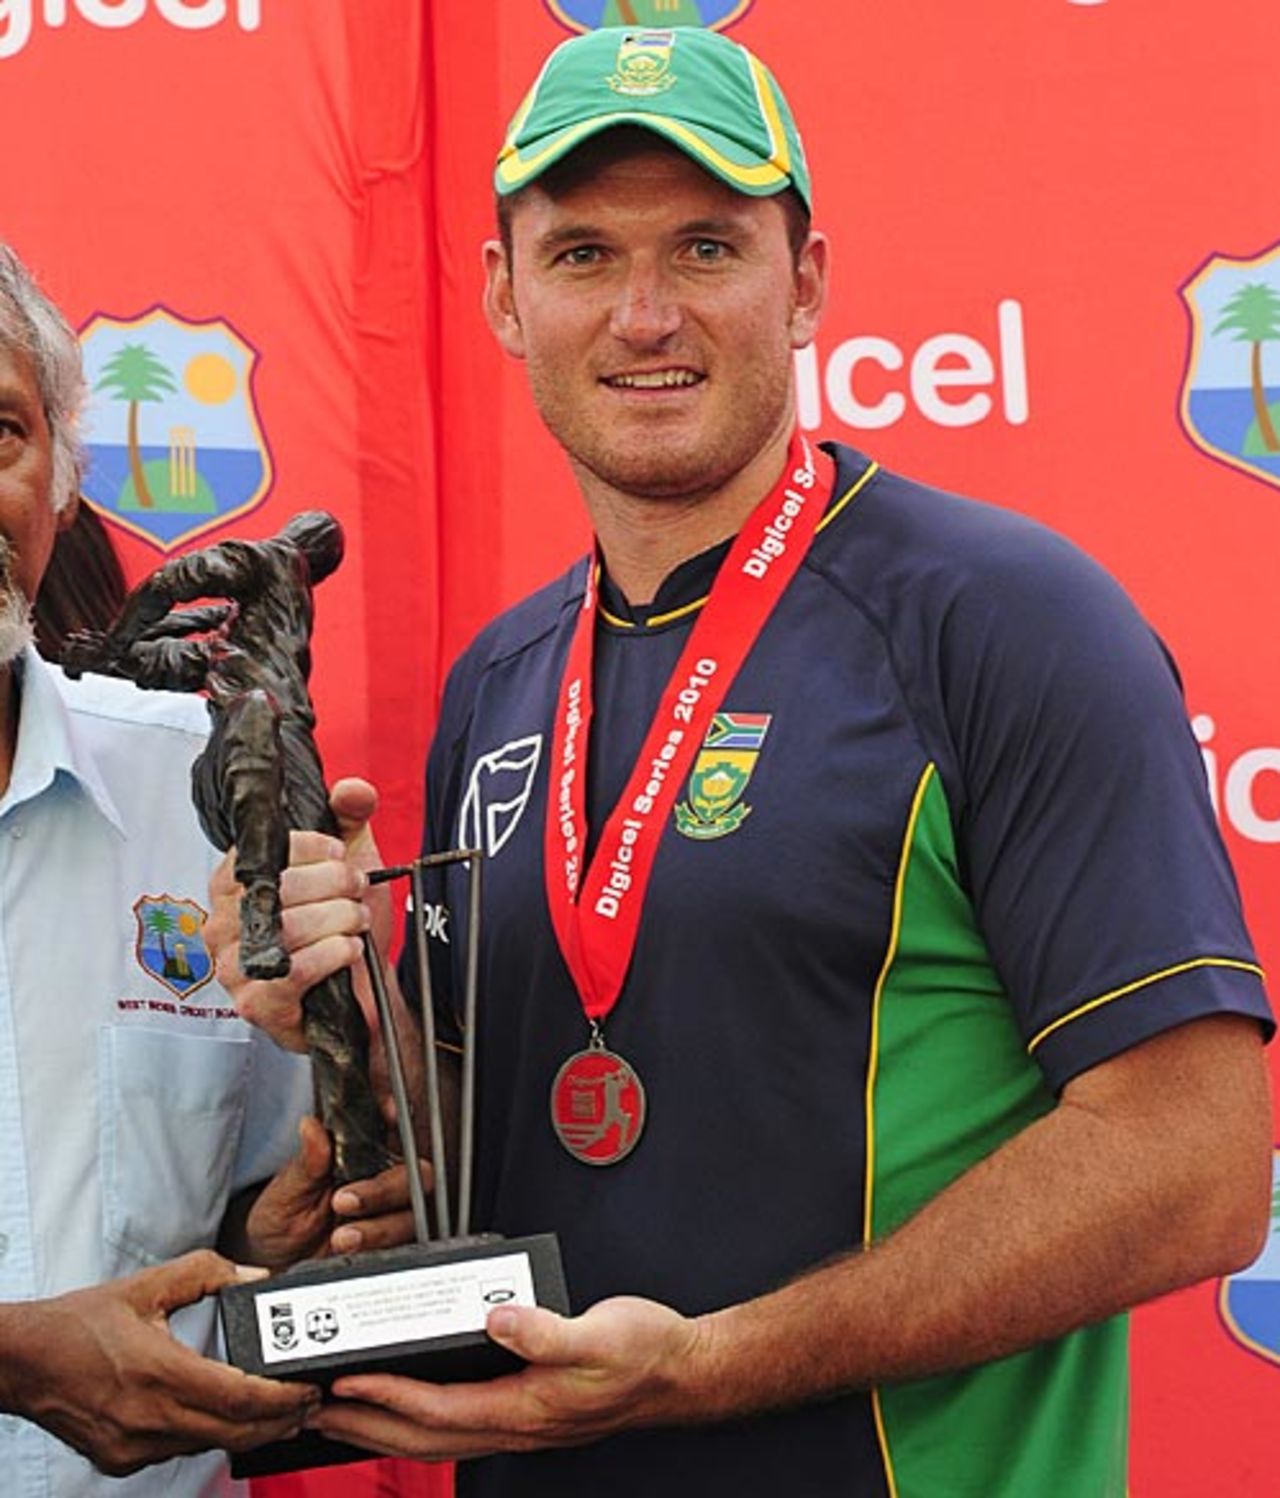 Graeme Smith with the trophy, West Indies v South Africa, 5th ODI, Port of Spain, Trinidad, June 3, 2010